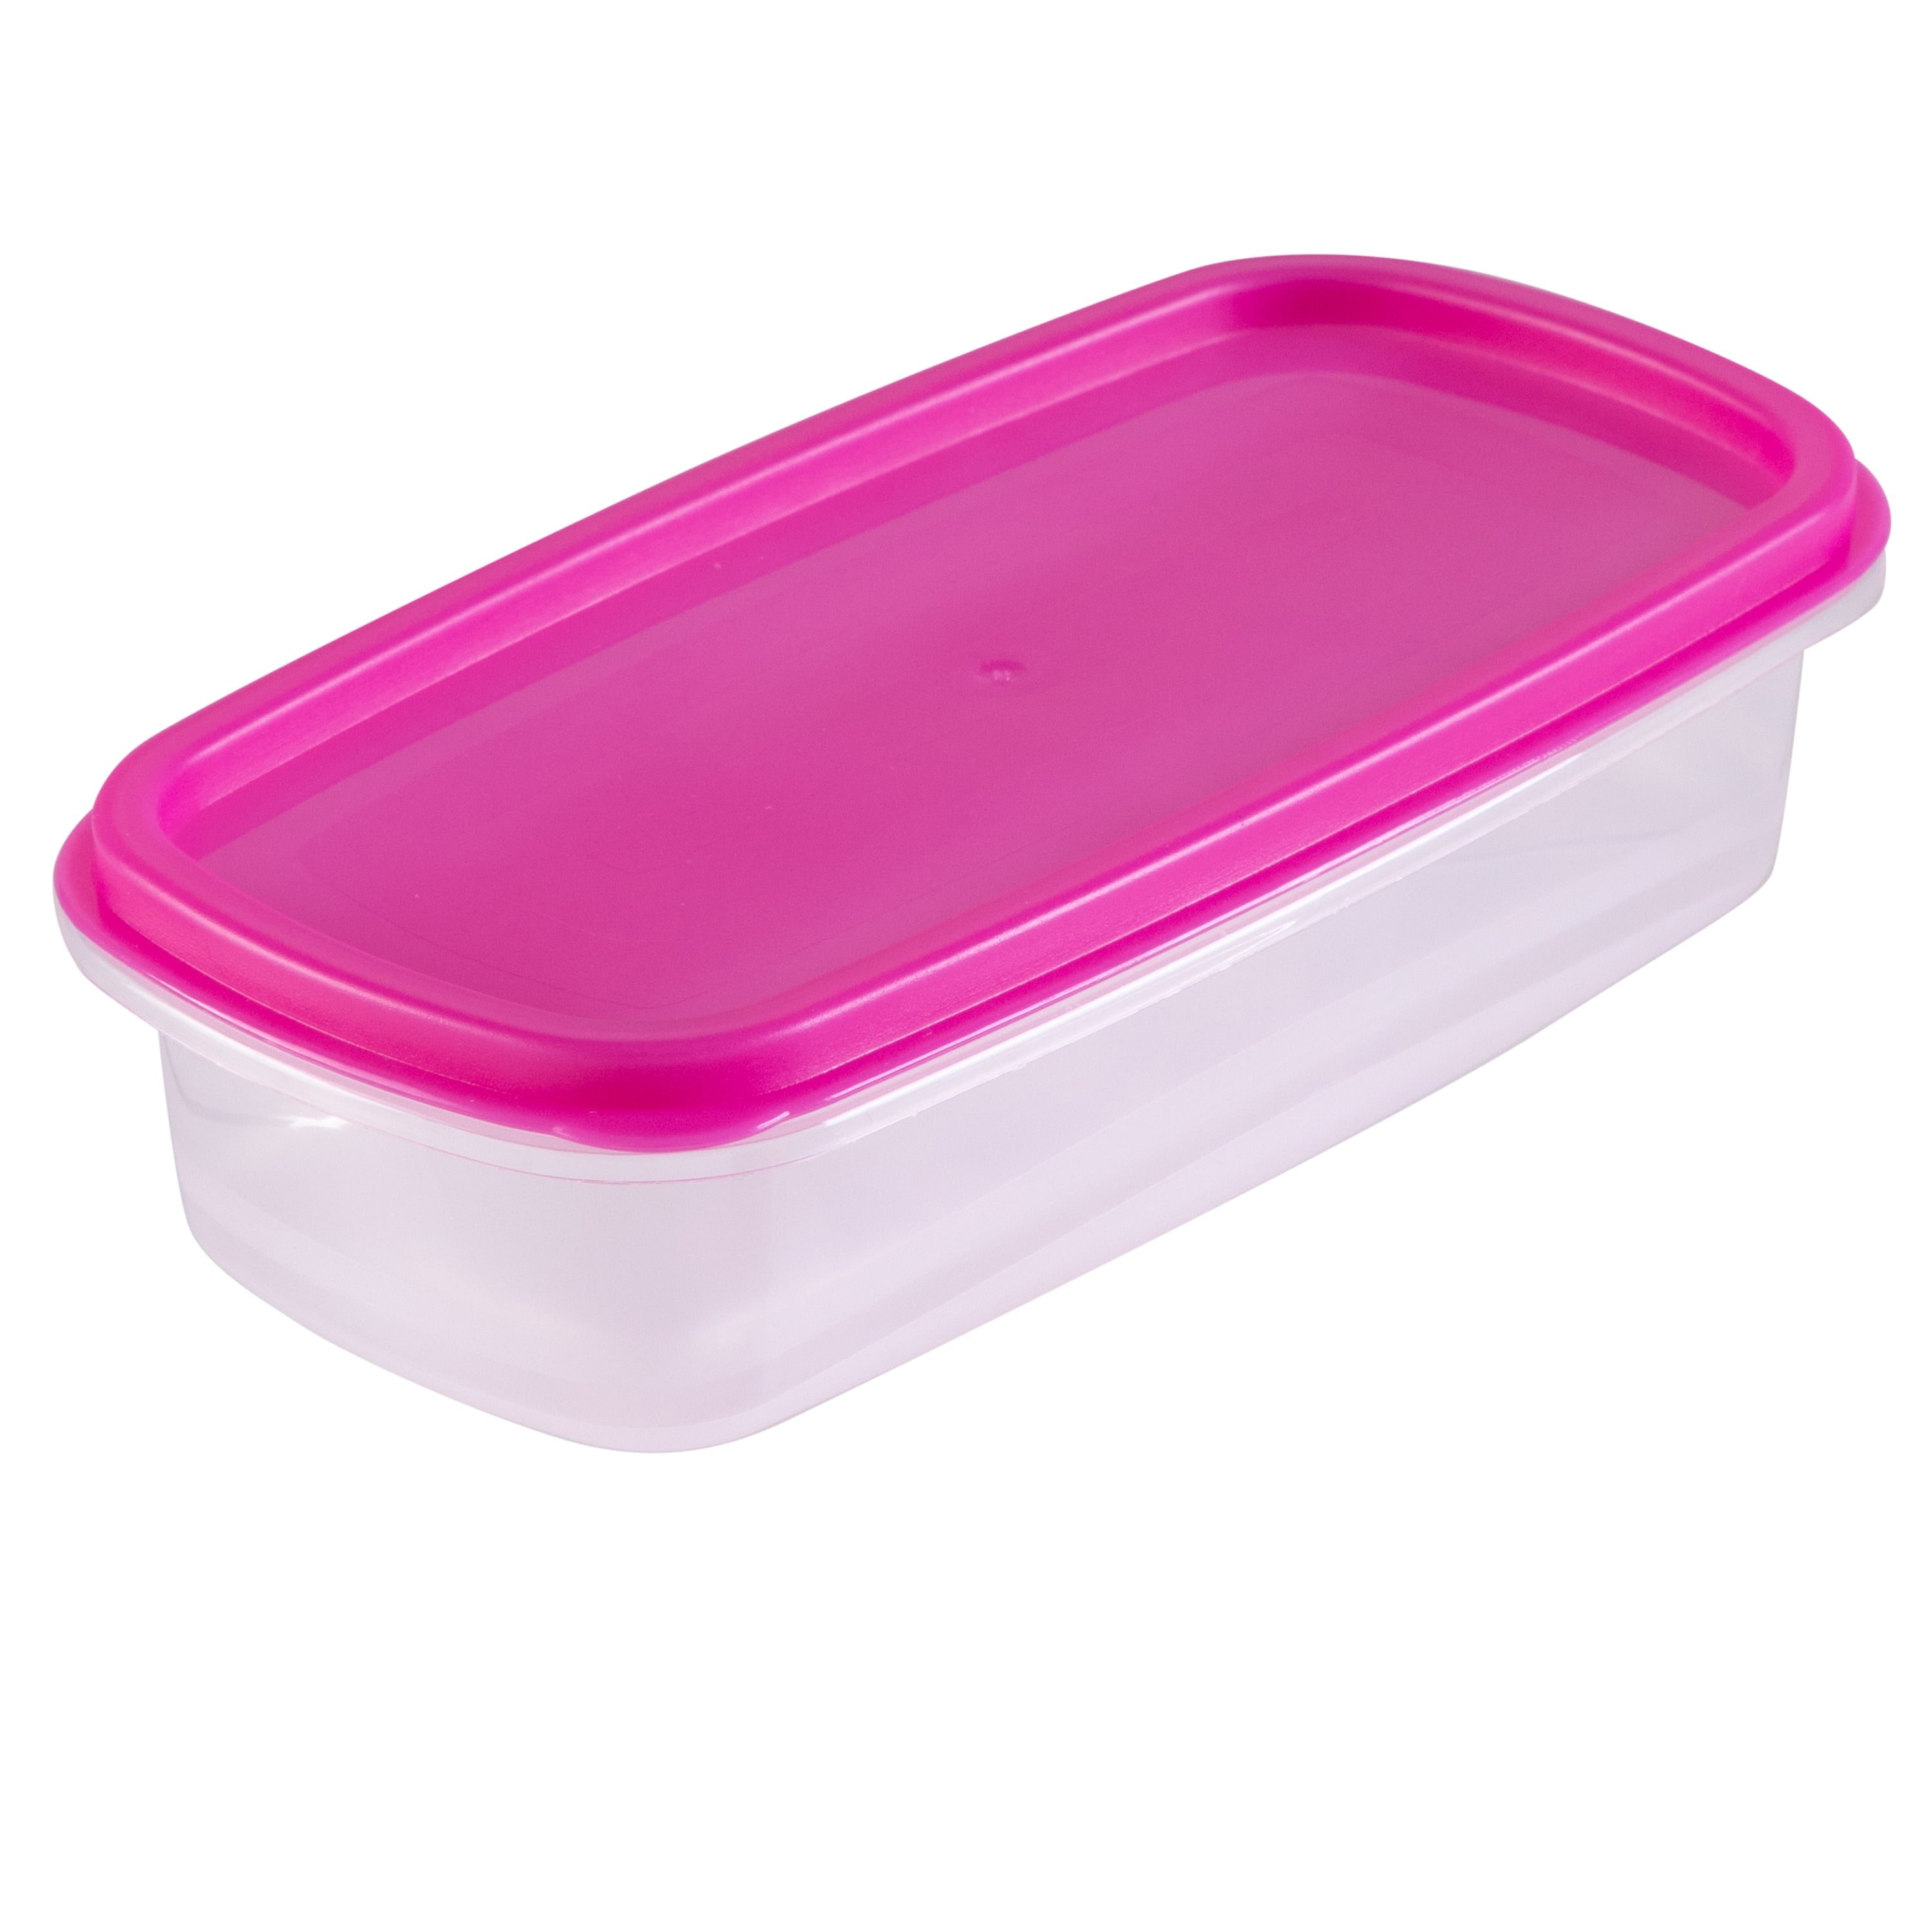 UMI UMIZILI Set of 12 Pink Glass Food Storage Containers, Meal